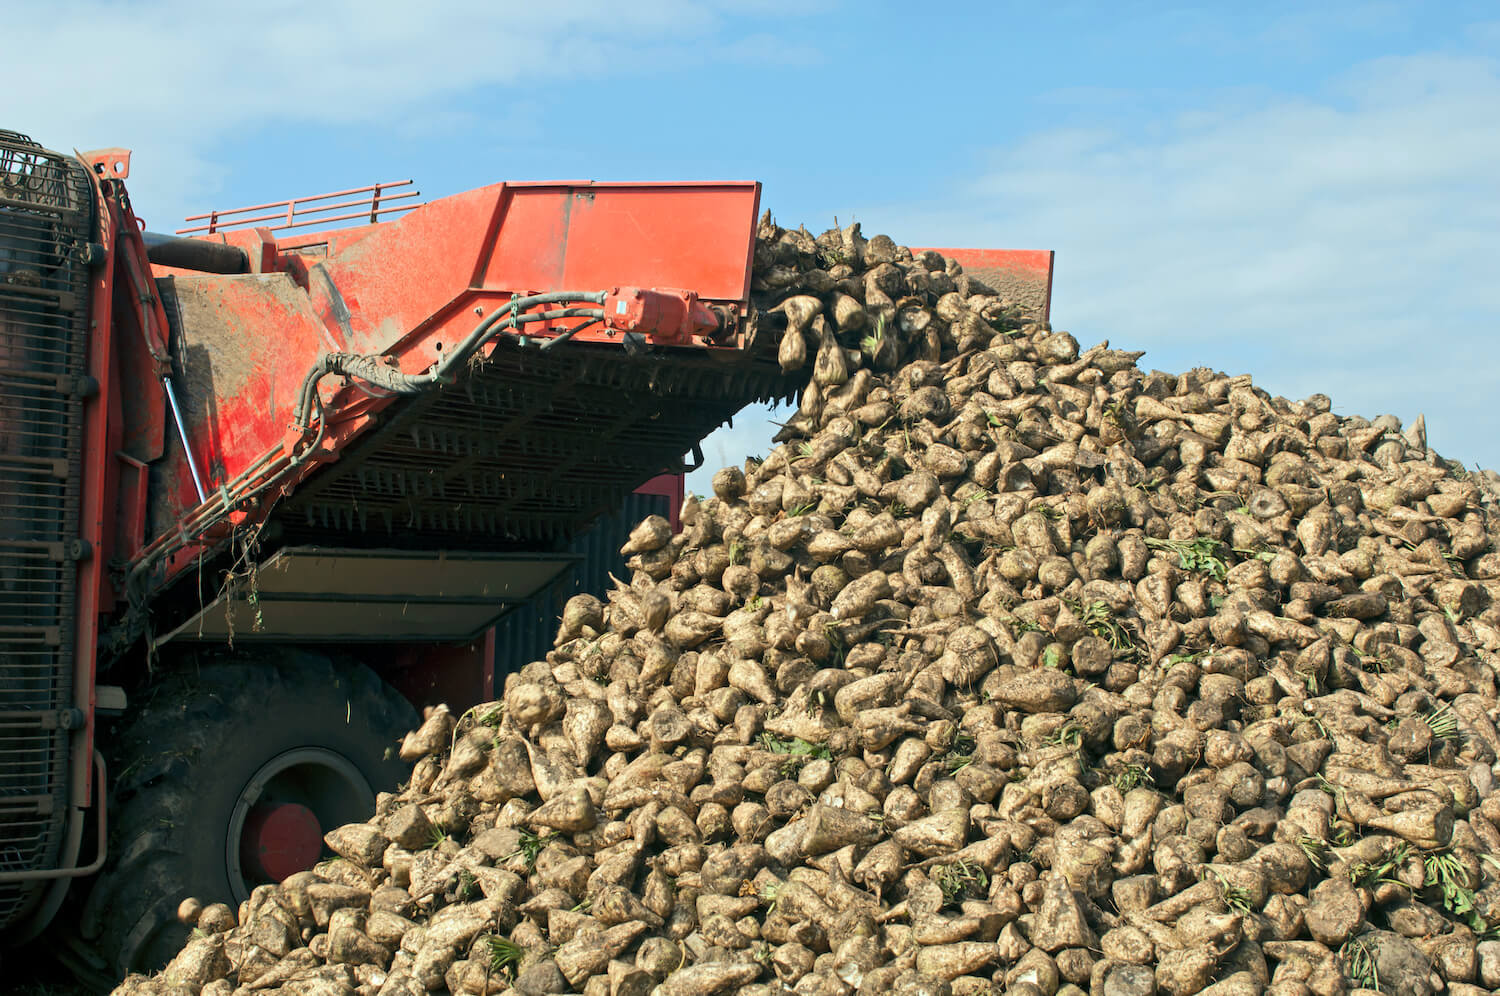 A tractor harvests a pile of sugar beets. October 2020